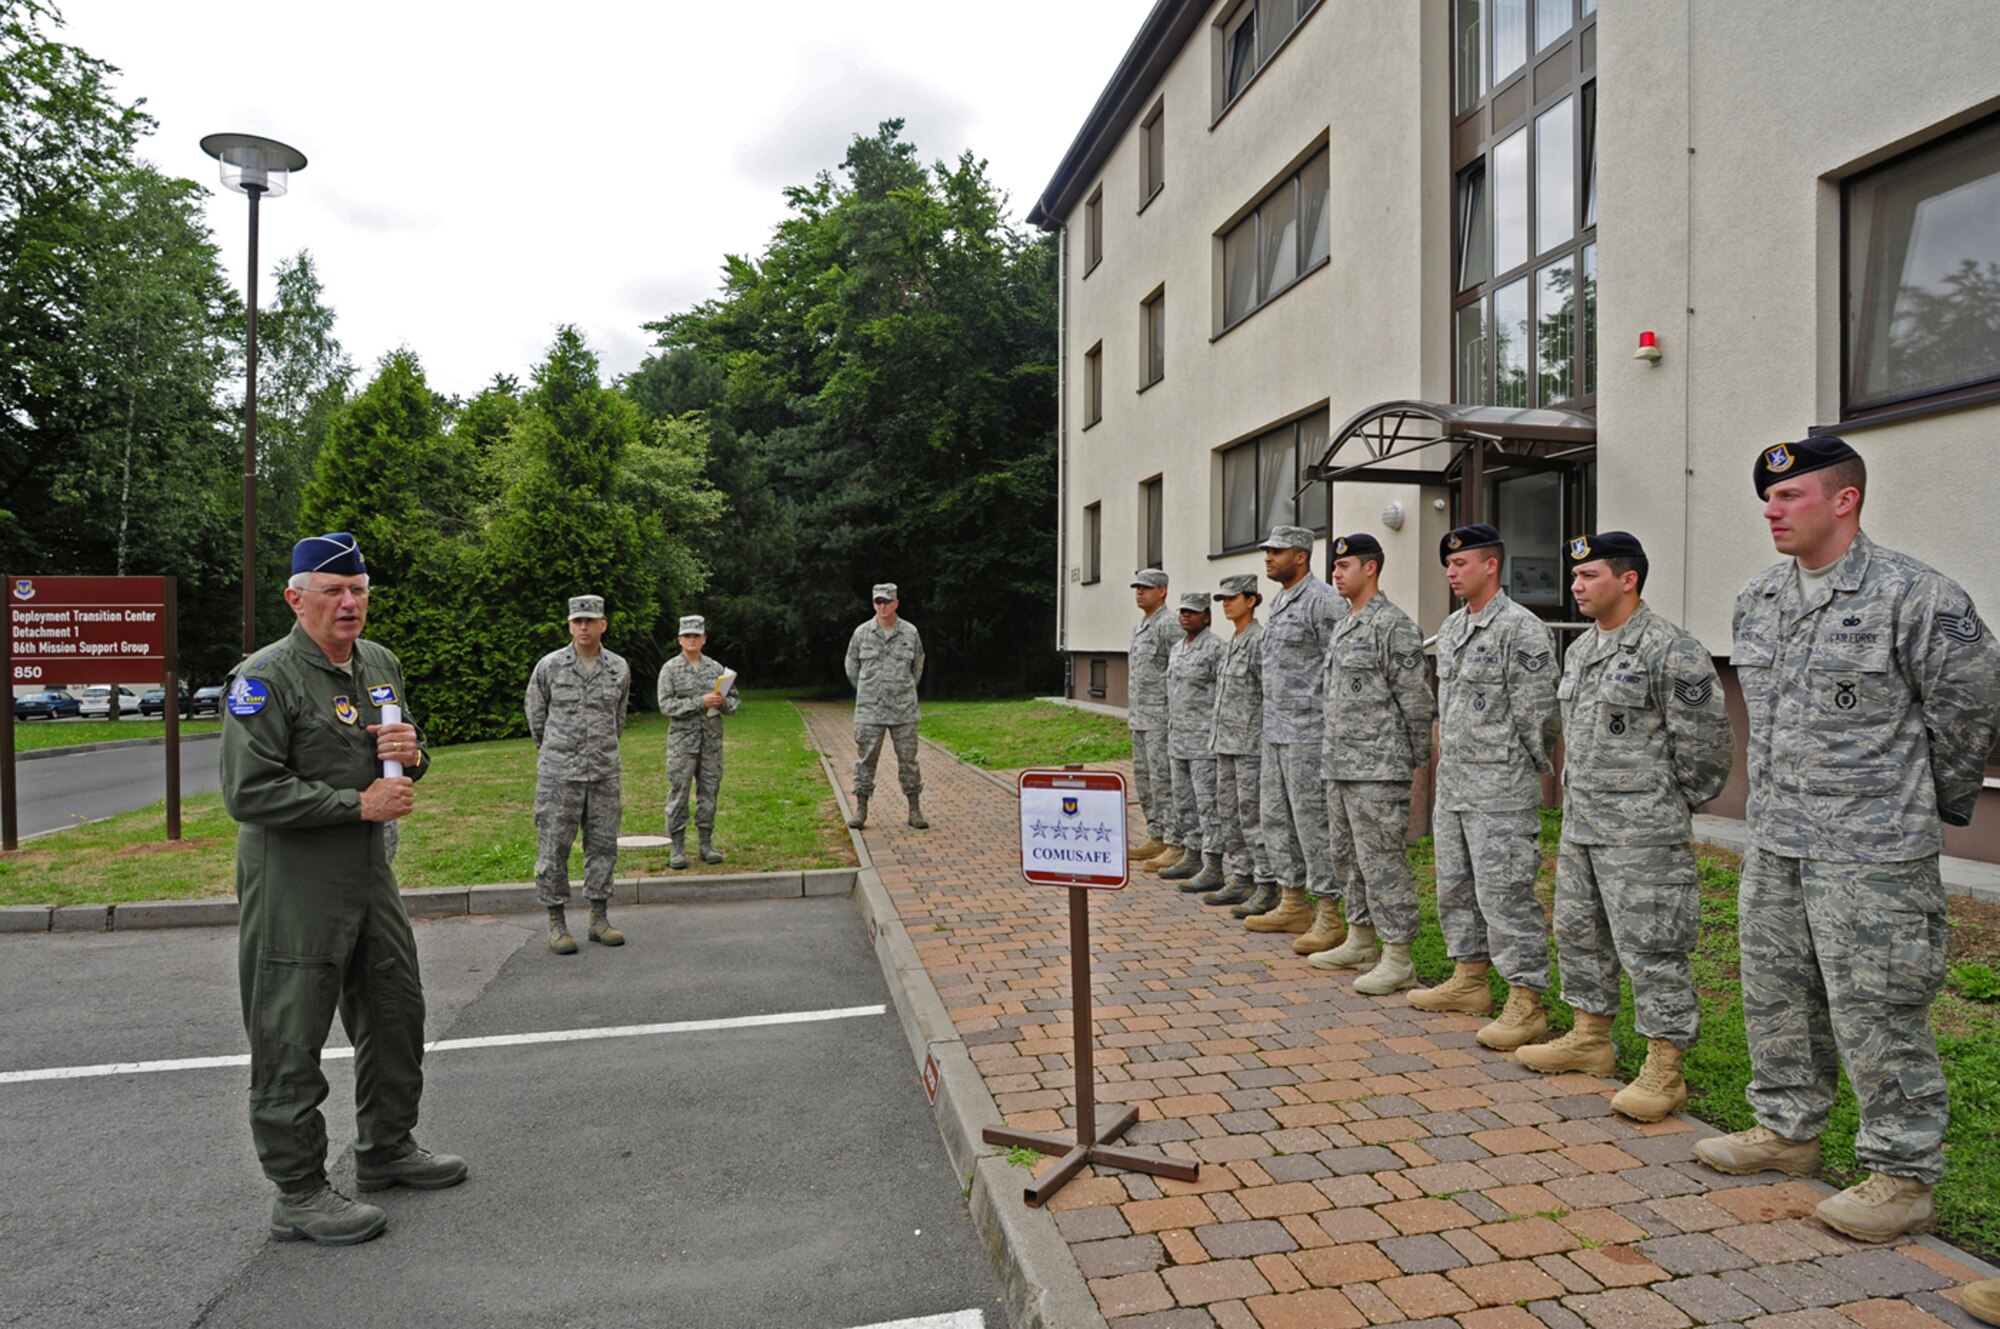 U.S. Air Force Gen. Roger A. Brady, U.S. Air Forces in Europe commander, visits the staff of the Deployment Transition Center, Detachment 1, 86th Mission Support Group, Ramstein Air Base, Germany, July 27, 2010. General Brady visited to review and discuss USAFE execution of the new Airmen Resiliency Program aimed at Airmen returning from the area of responsibility who are in career fields that experience frequent "outside-the-wire" missions. The DTC provides deployment returnees an opportunity to decompress and reintegrate into home and work life with a resilience building, strength-based approach to assisting Airmen regularly exposed to significant risk of death in a combat zone. (U.S. Air Force photo/Airman 1st Class Brea Miller)